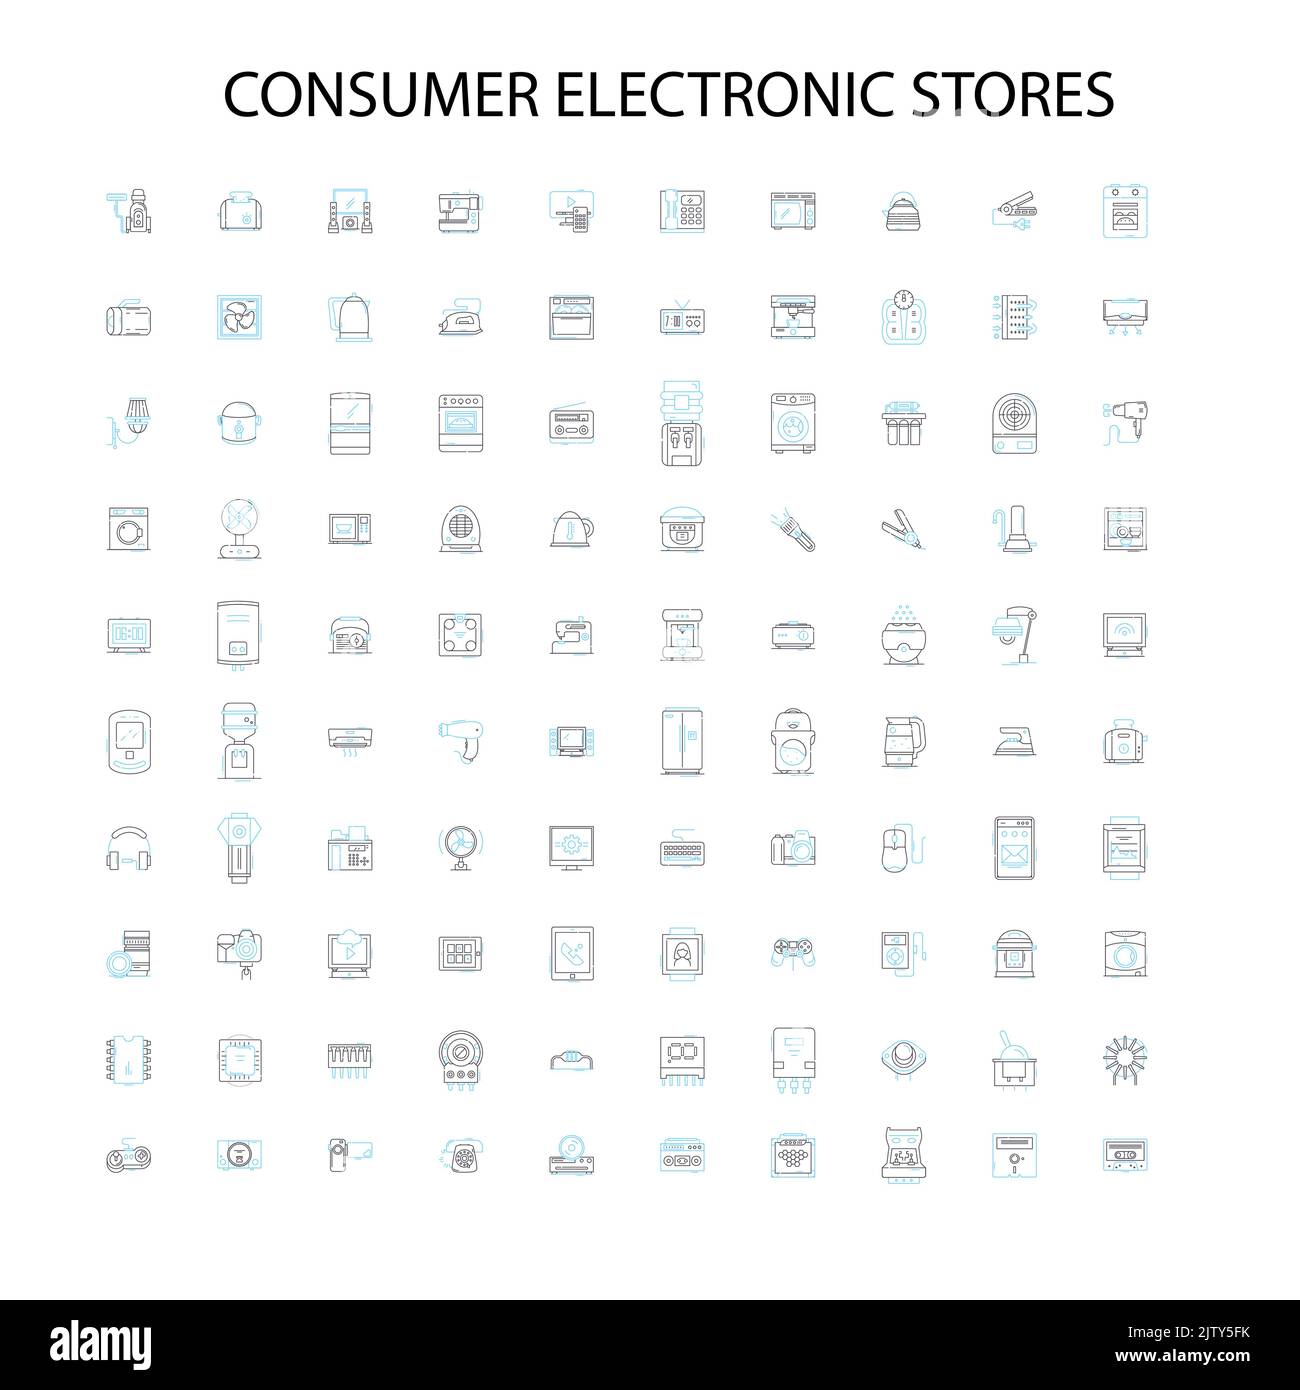 consumer electronic stores icons, signs, outline symbols, concept linear illustration line collection Stock Vector